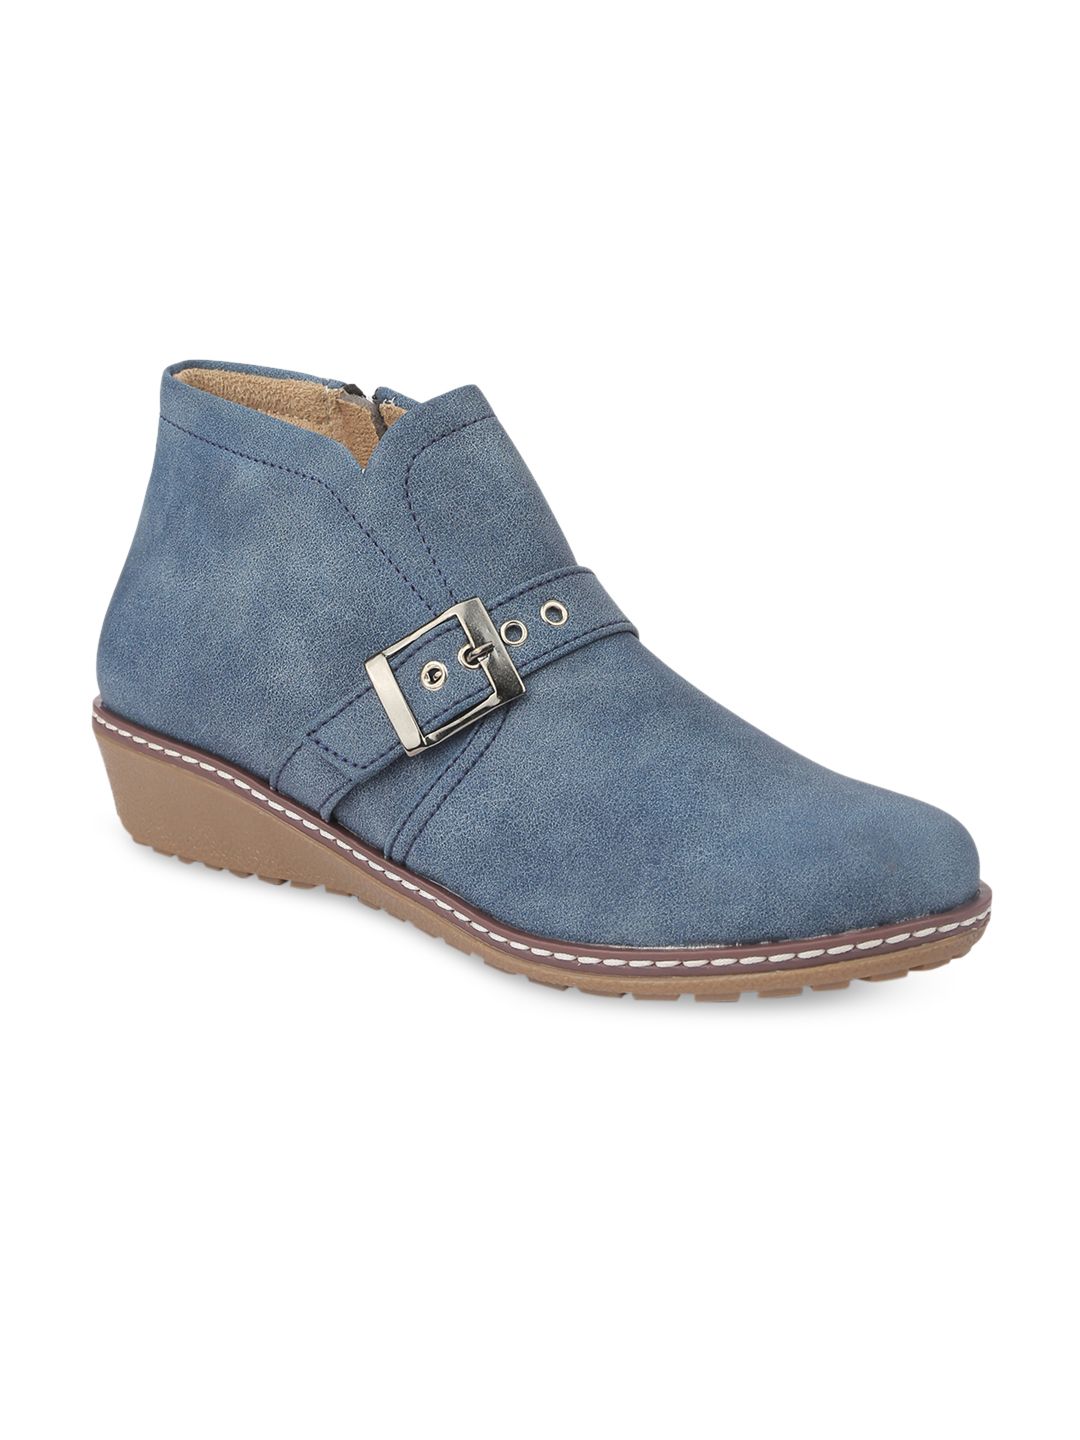 VALIOSAA Women Blue Solid Heeled Boots Price in India